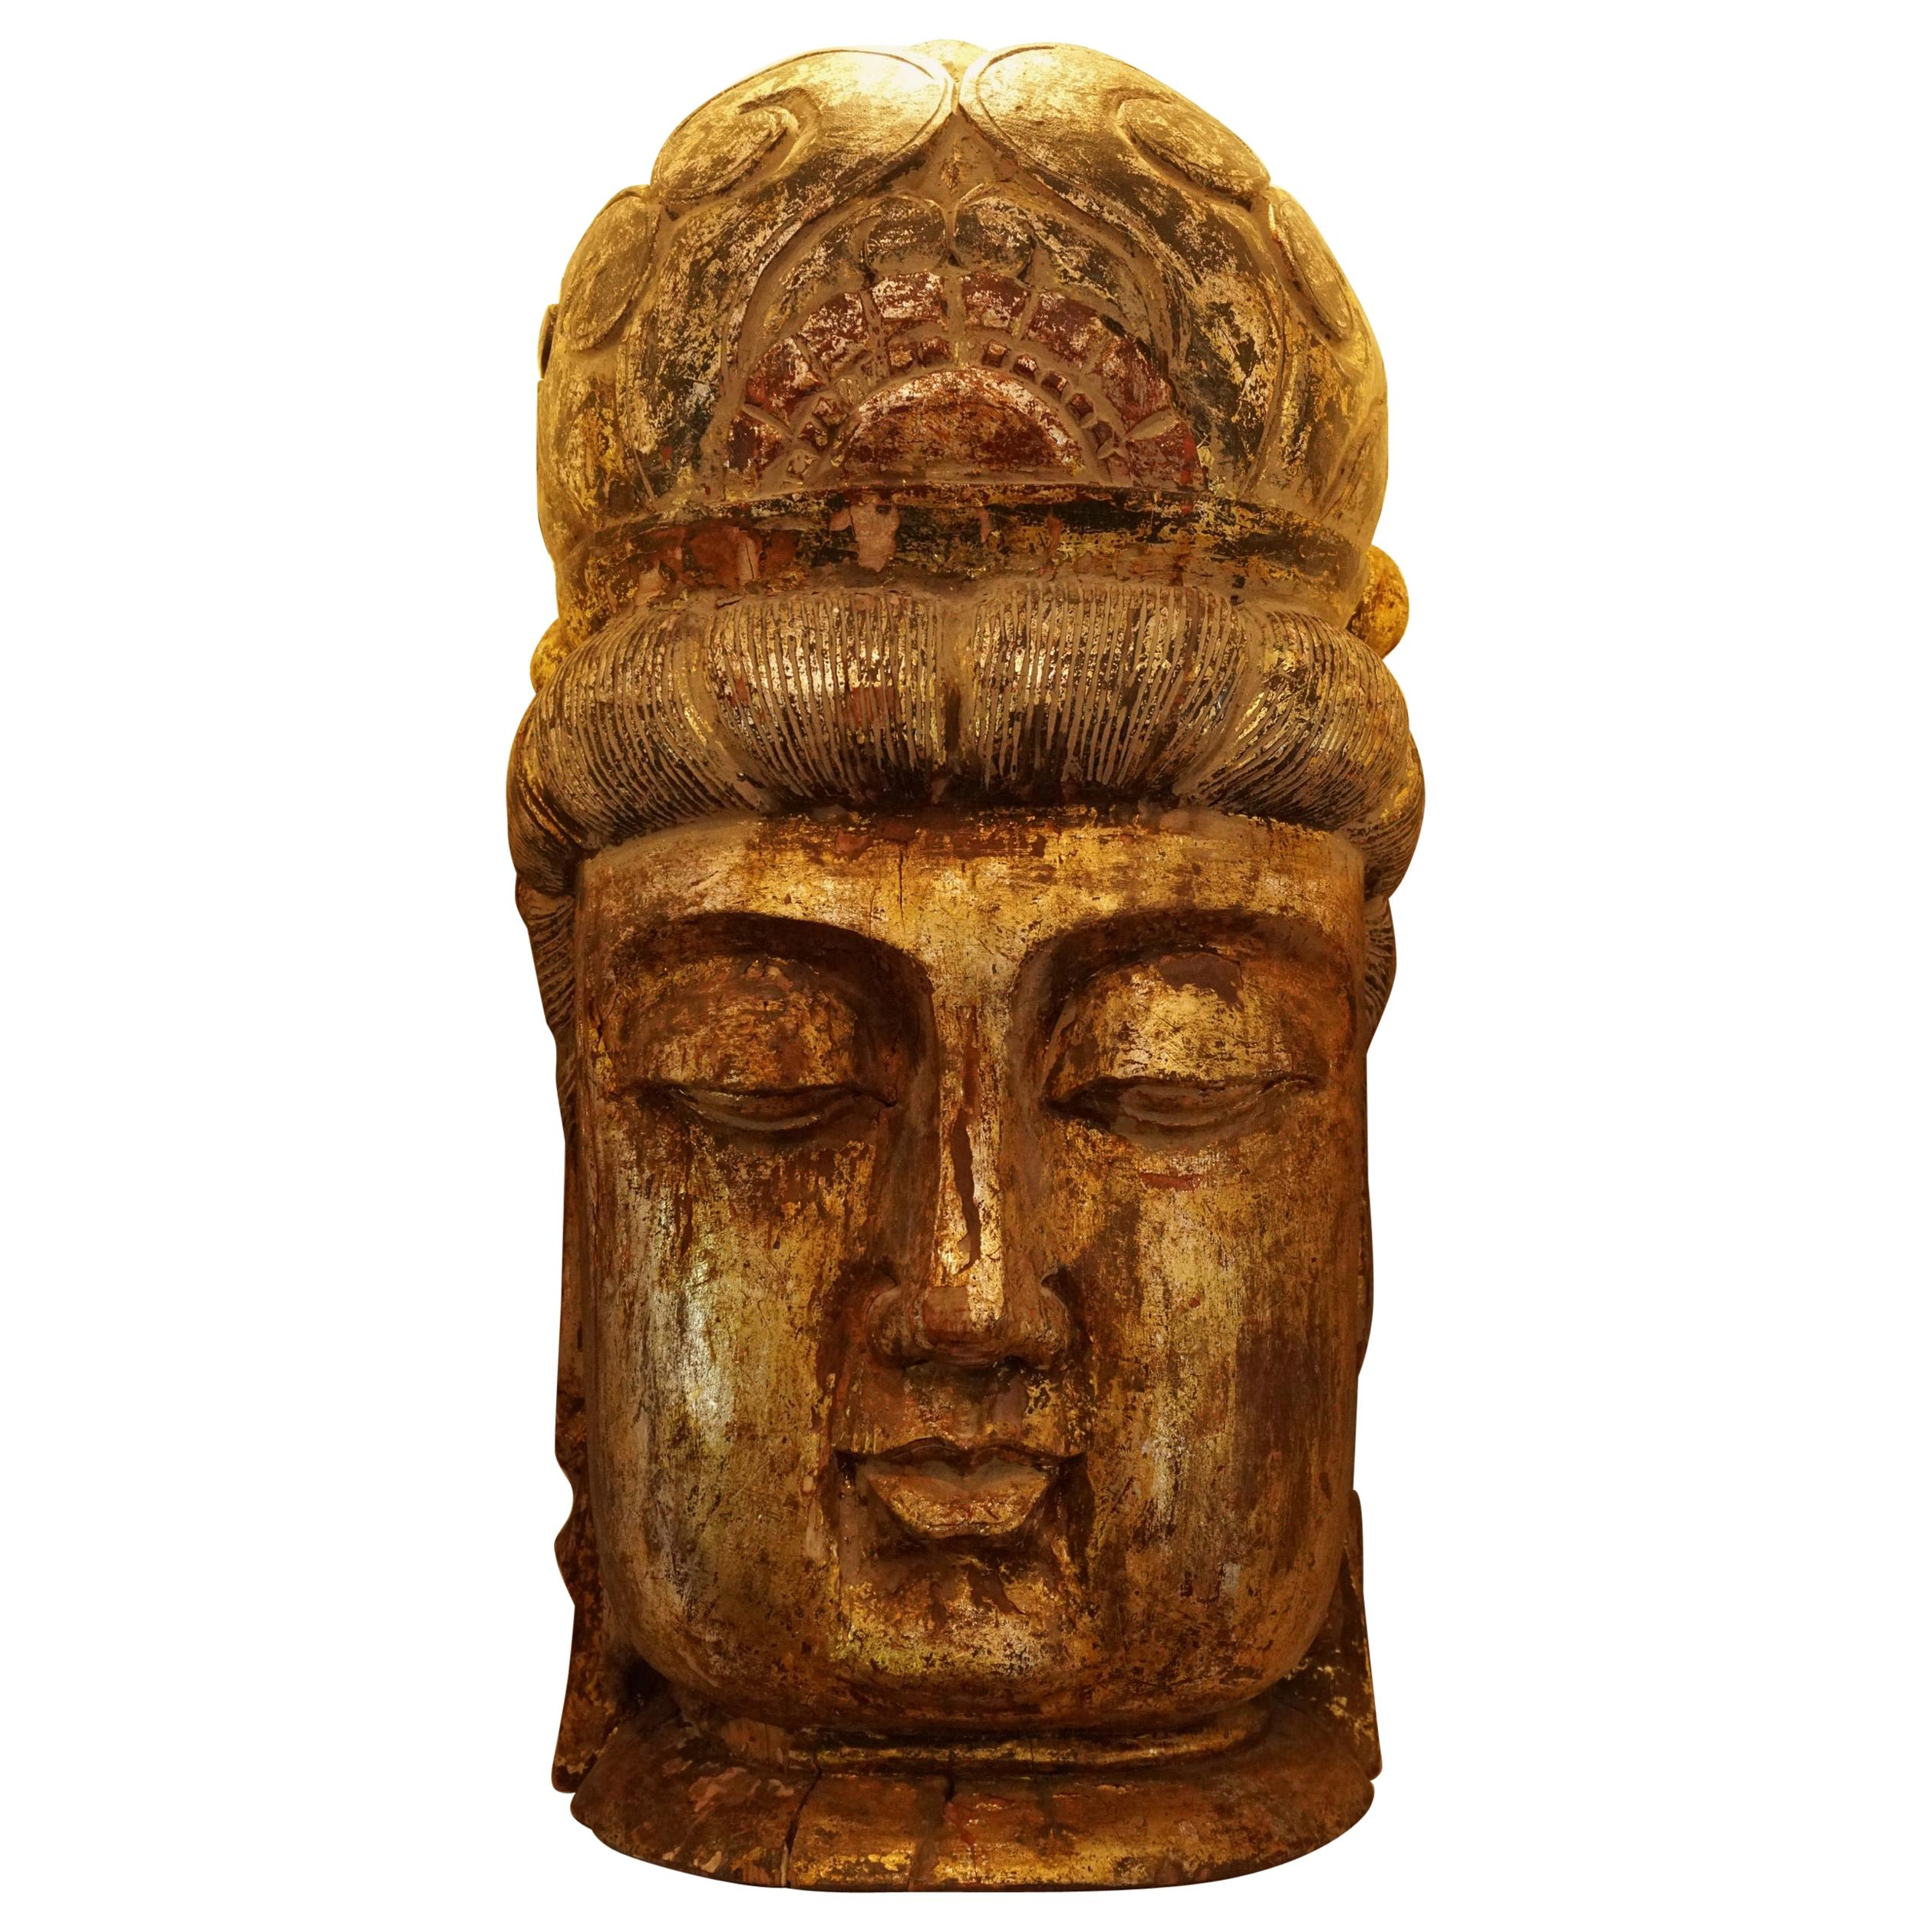 Qing Dynasty Chinese Wood Carved Gilt Figure of a Buddha Head